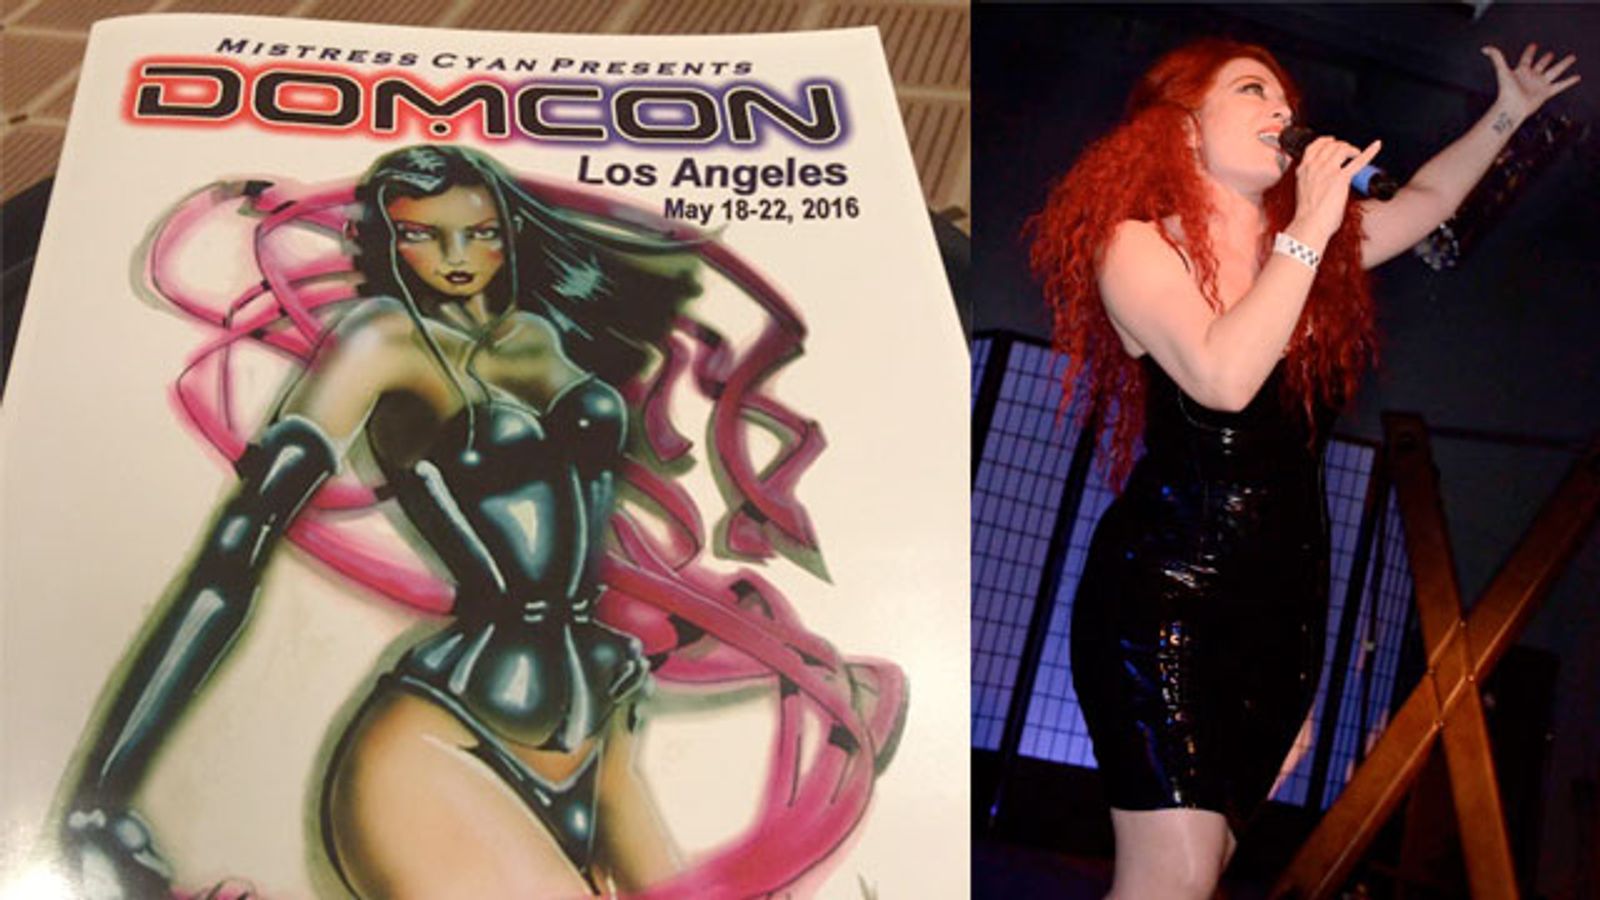 Fans of Kink, BDSM Gather at Annual DomCon LA Event